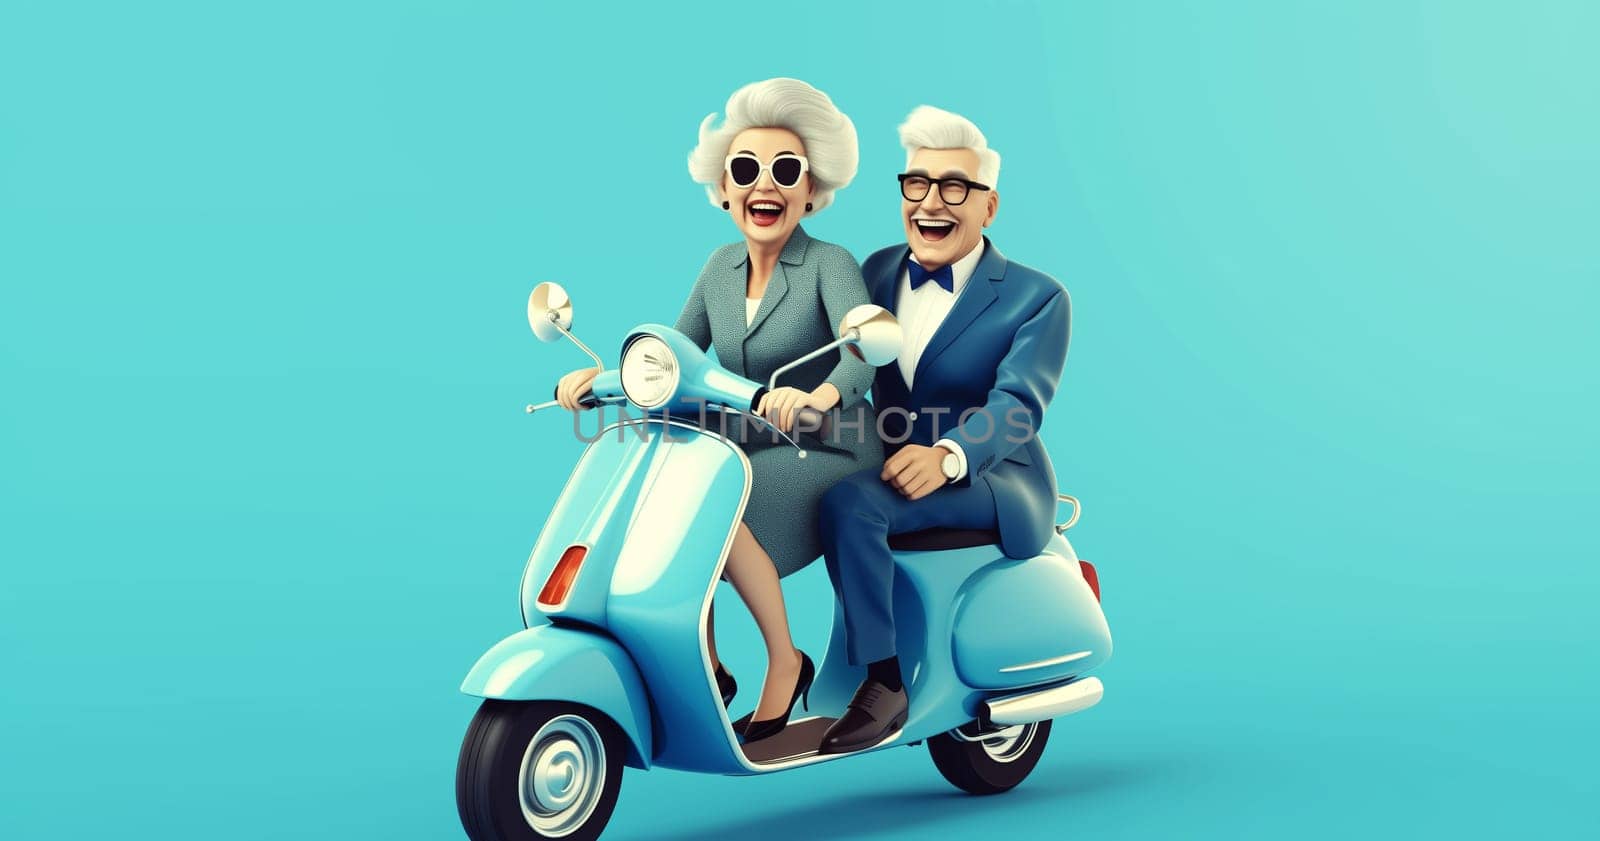 Cheerful happy senior couple riding scooter together, stylish elderly woman and man driving moped enjoying summer vacation, road trip